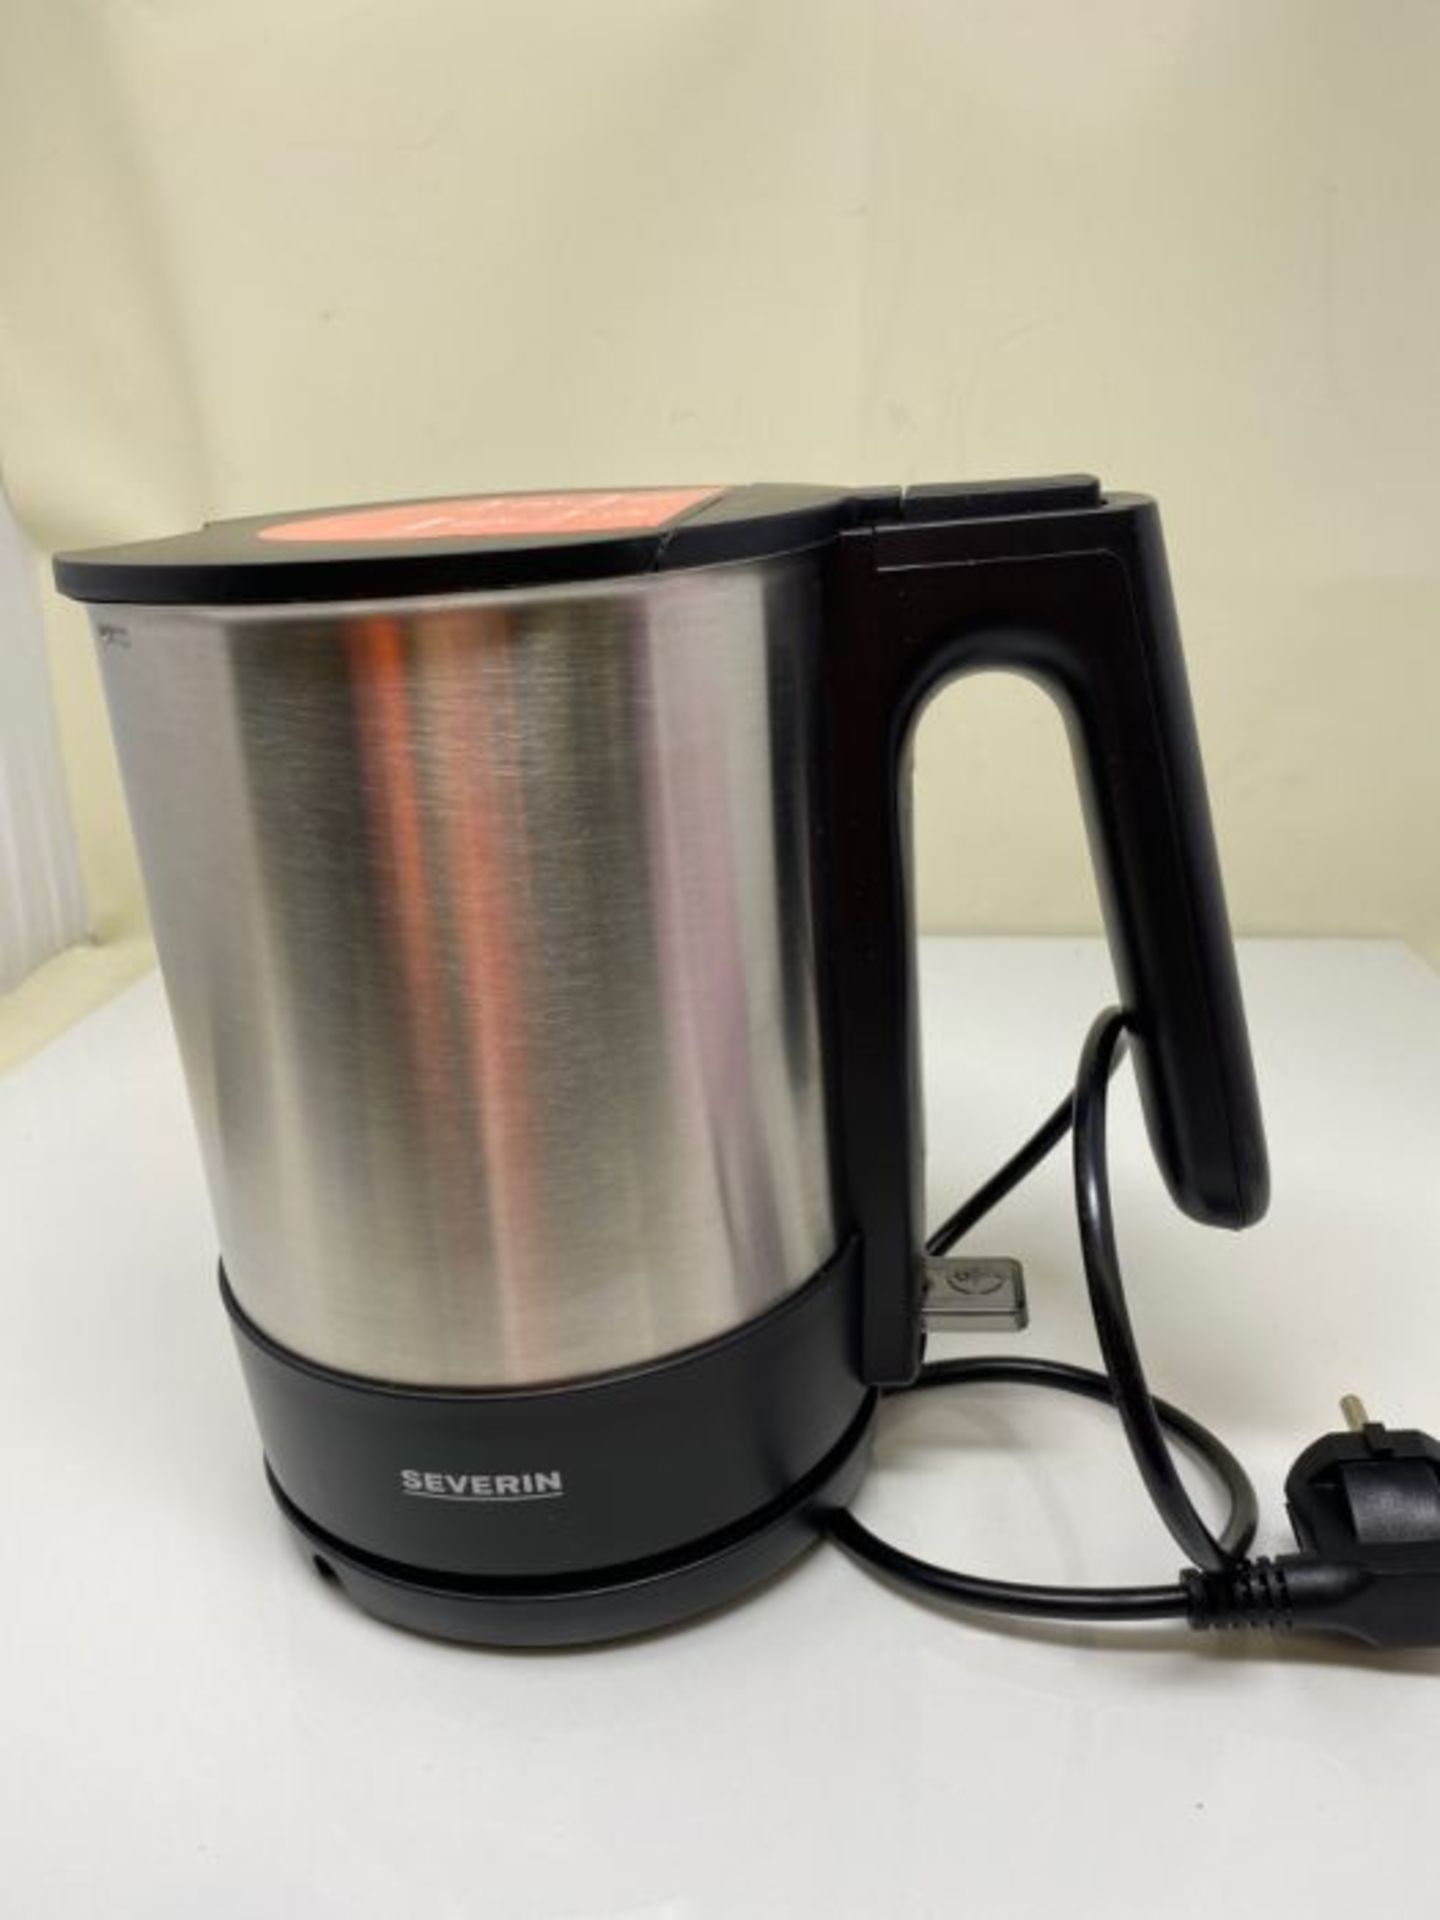 SEVERIN WK 3409 Kettle 2200 Plastic 1.7 Litres Brushed Stainless Steel Black - Image 3 of 3